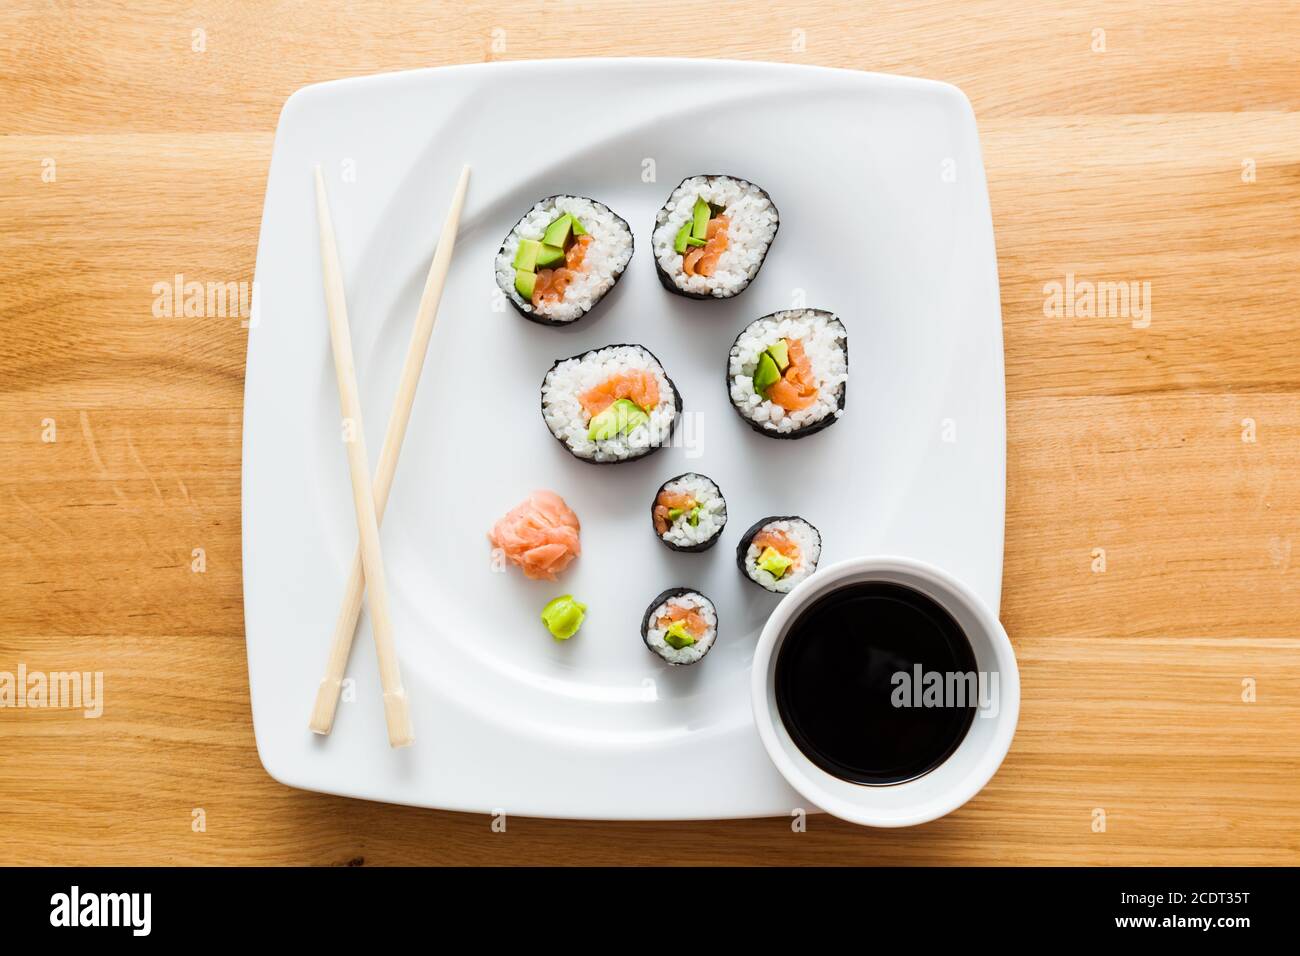 Sushi with salmon, avocado, rice in seaweed served with wasabi and ginger. Stock Photo